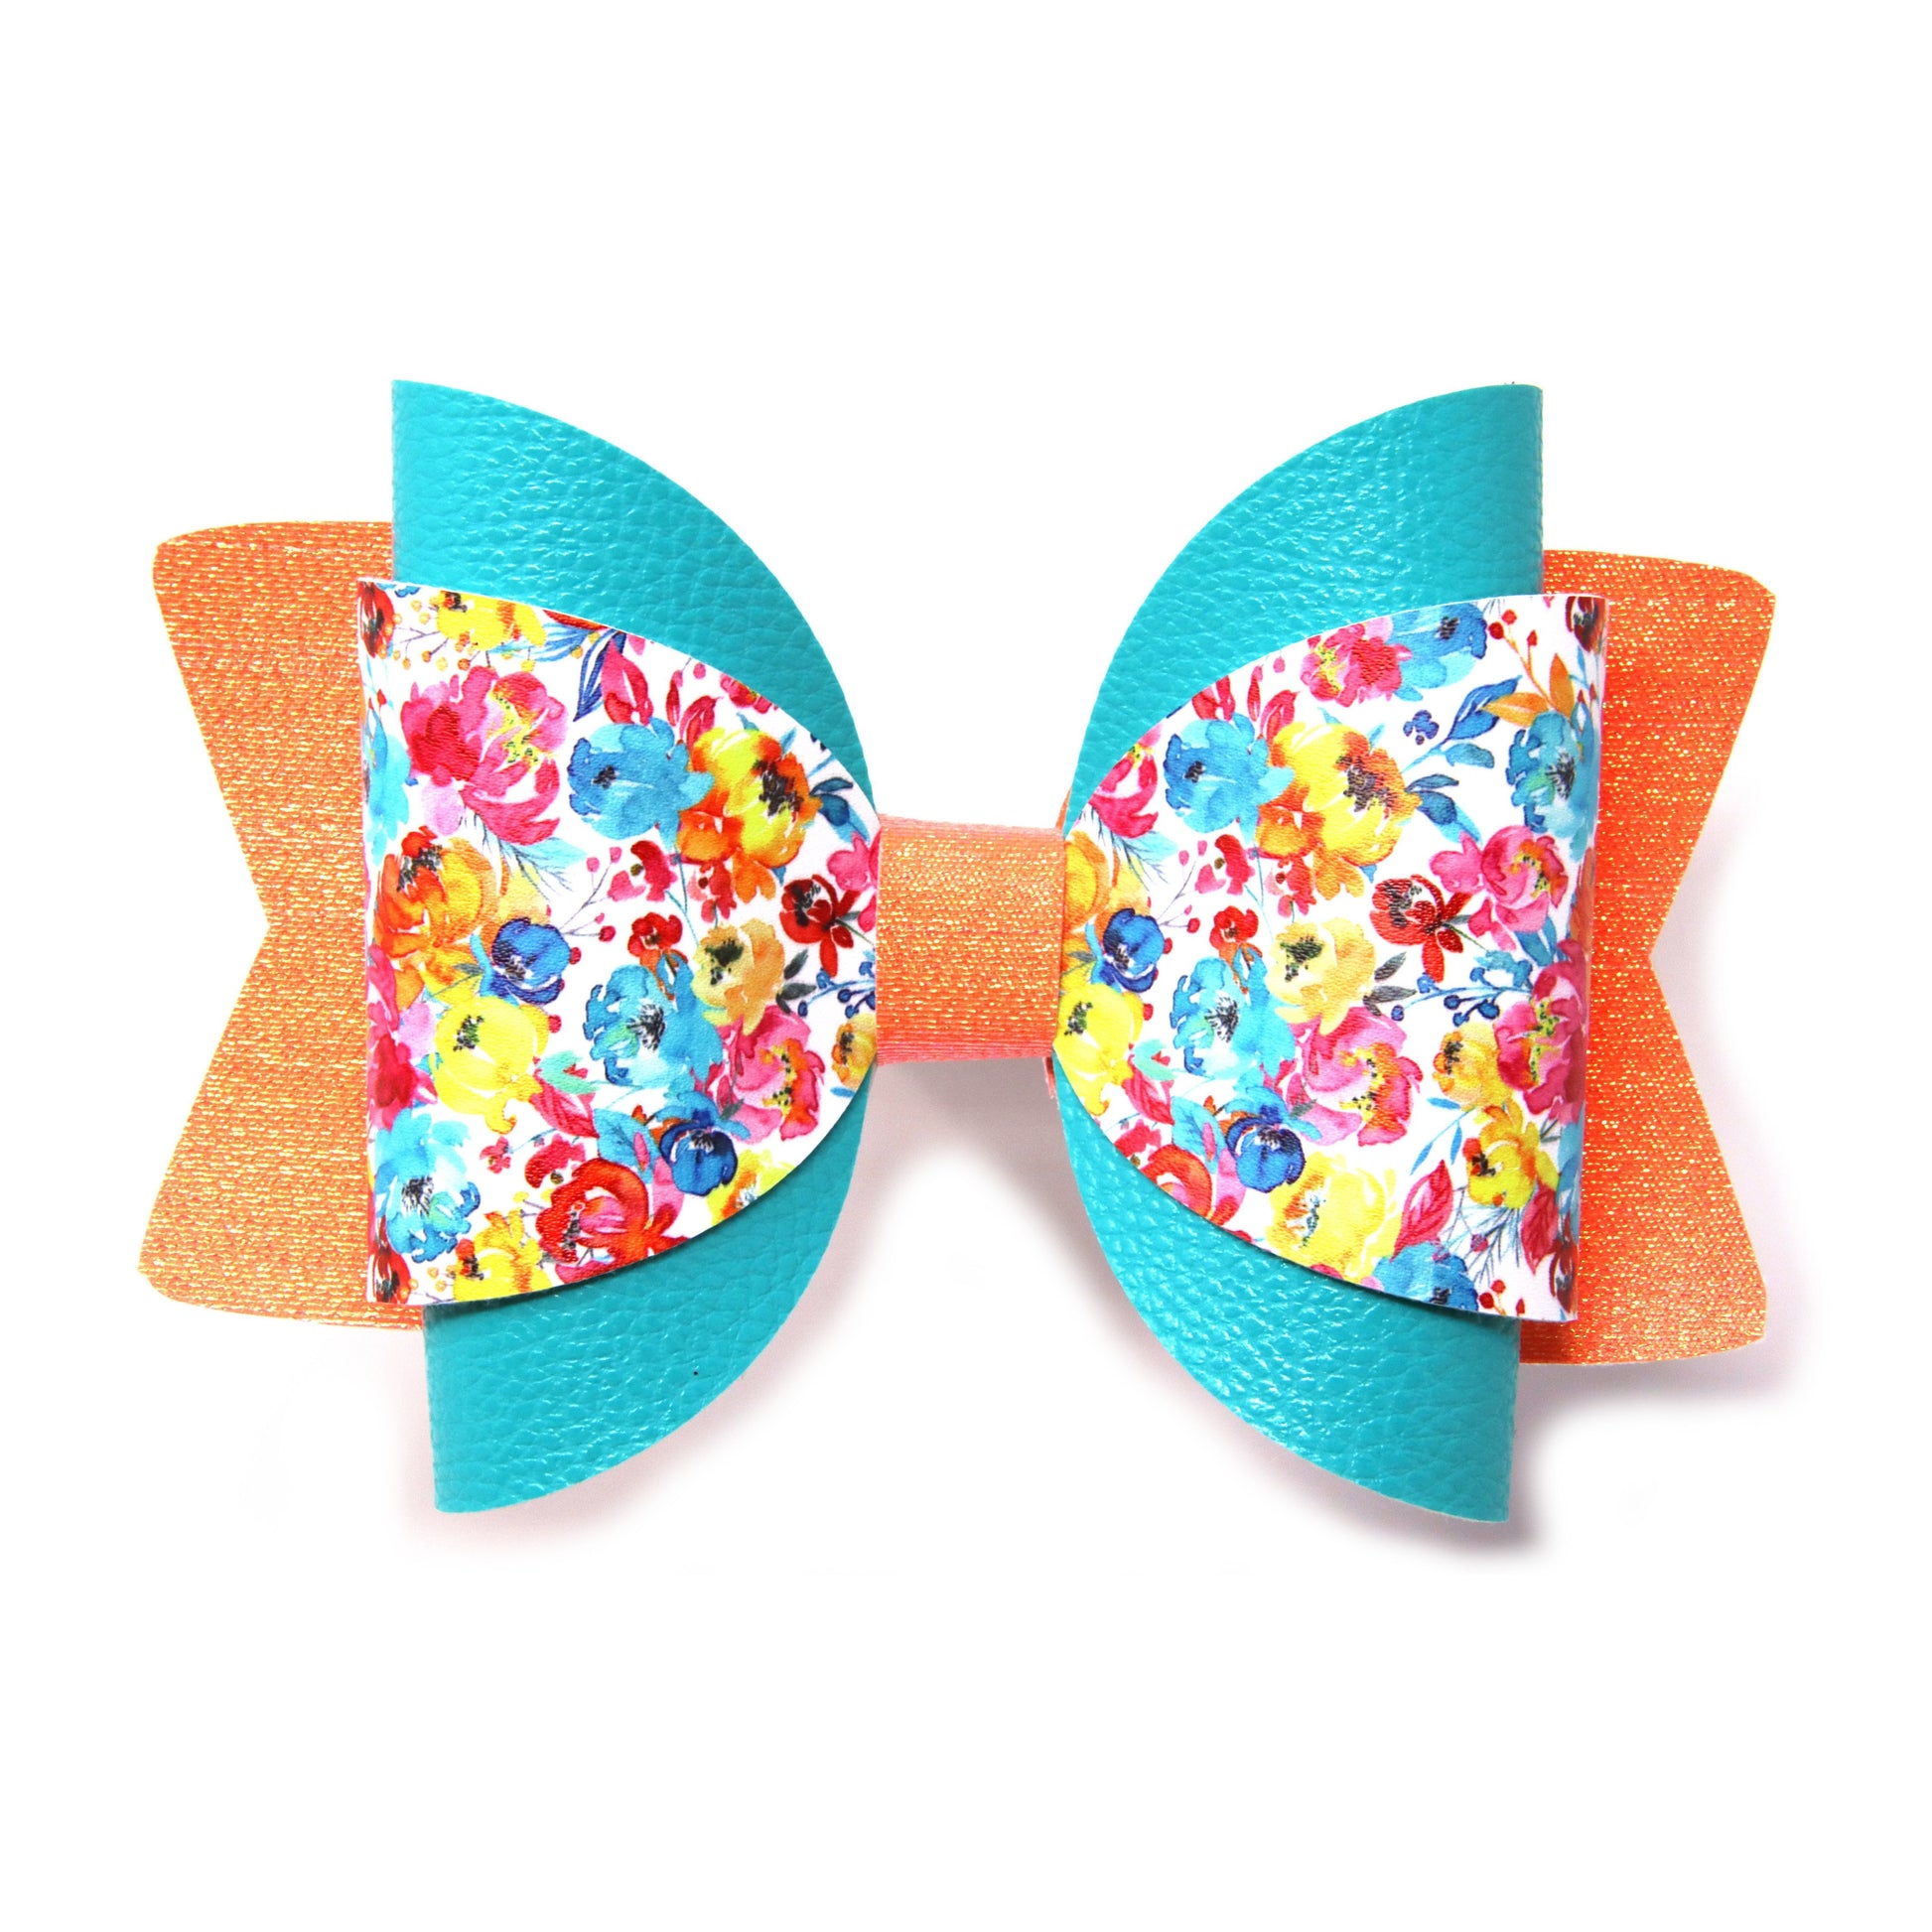 Coral, Teal & Bright Floral Chloe Bow 5.5"